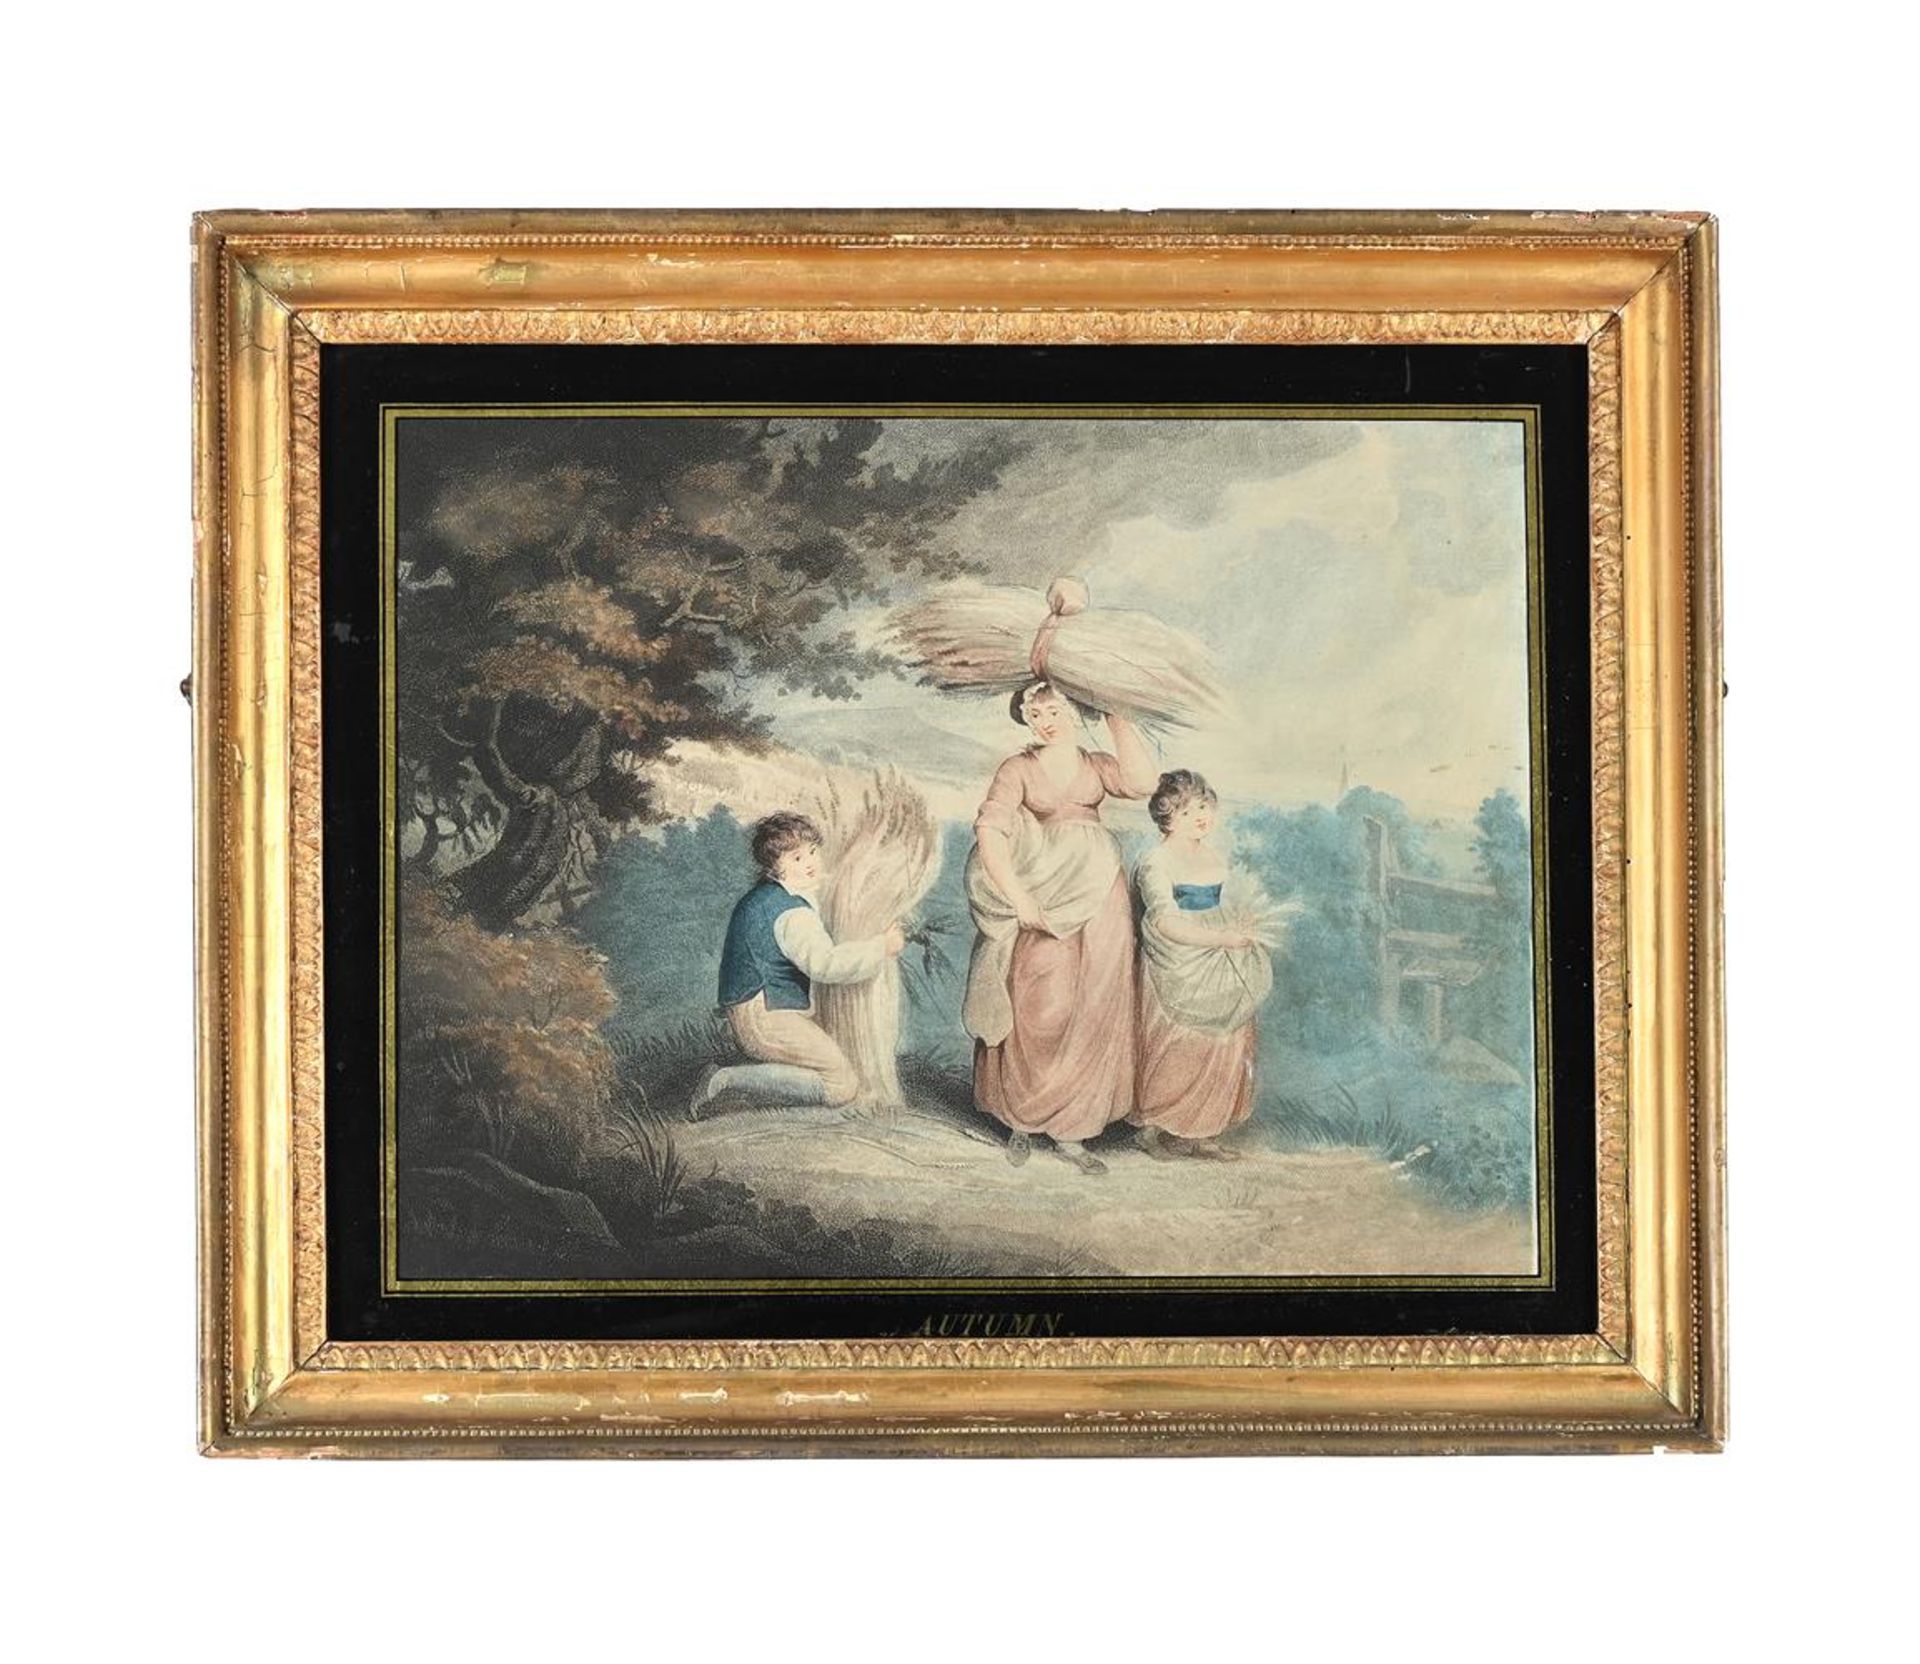 AFTER GEORGE MORLAND, A SET OF FOUR PRINTS DEPICTING THE SEASONS - Image 5 of 5